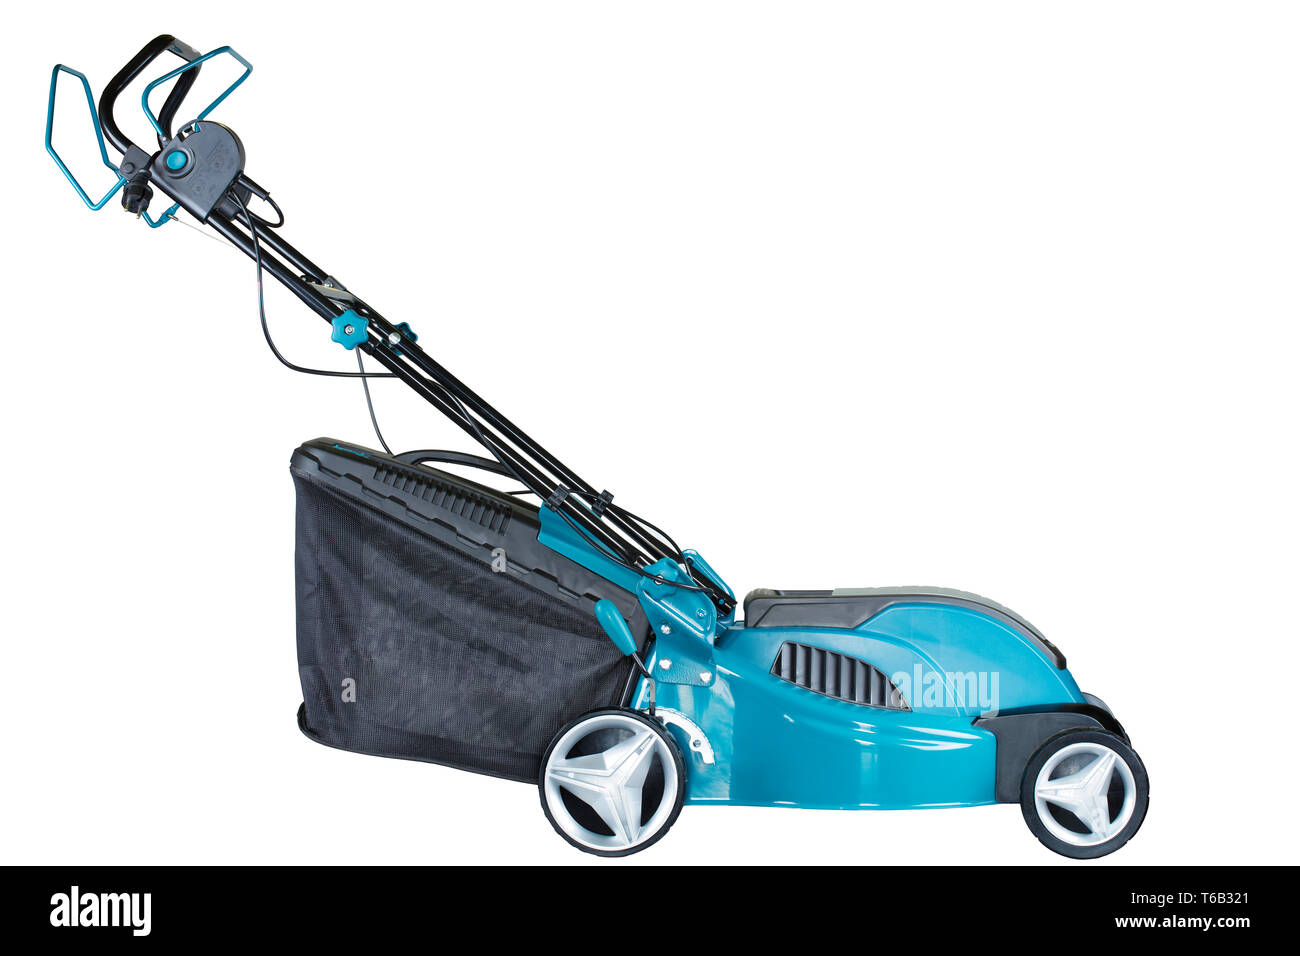 lawn mower electric on wheels turquoise colour with a bag of grass collector isolated on white background, high resolution, profile view Stock Photo